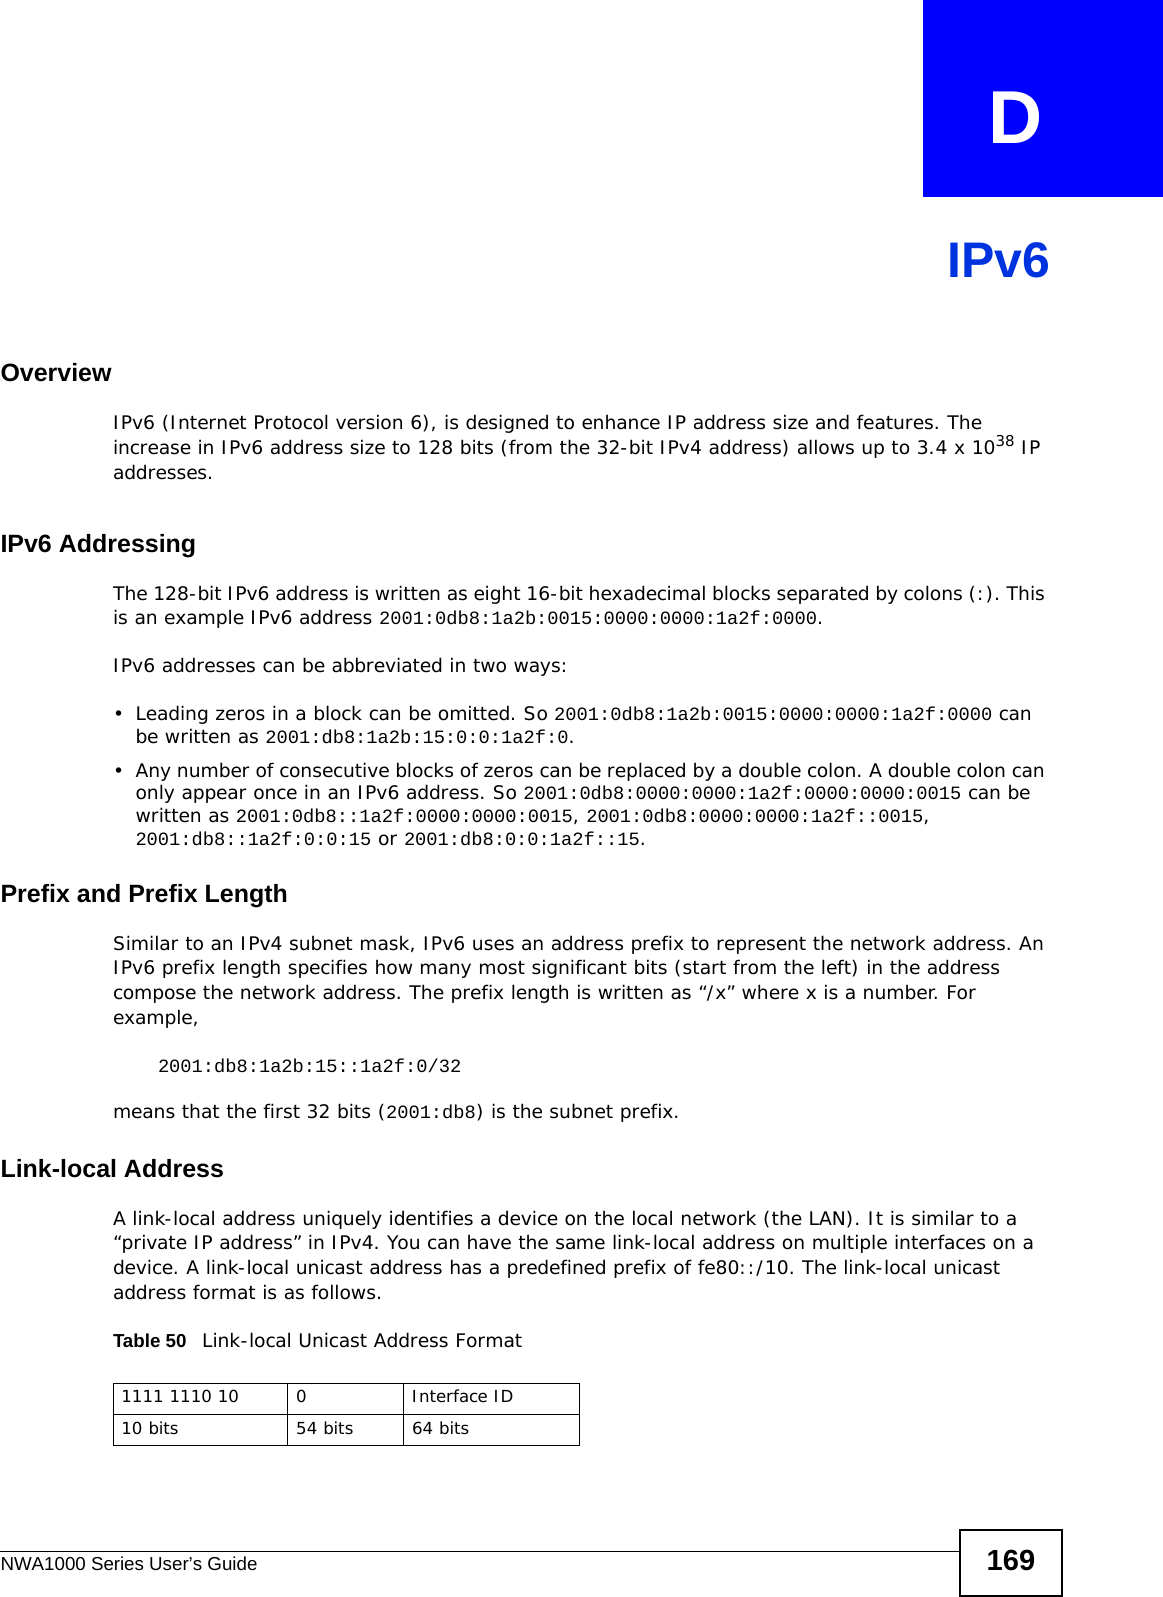 NWA1000 Series User’s Guide 169APPENDIX   DIPv6OverviewIPv6 (Internet Protocol version 6), is designed to enhance IP address size and features. The increase in IPv6 address size to 128 bits (from the 32-bit IPv4 address) allows up to 3.4 x 1038 IP addresses. IPv6 AddressingThe 128-bit IPv6 address is written as eight 16-bit hexadecimal blocks separated by colons (:). This is an example IPv6 address 2001:0db8:1a2b:0015:0000:0000:1a2f:0000. IPv6 addresses can be abbreviated in two ways:• Leading zeros in a block can be omitted. So 2001:0db8:1a2b:0015:0000:0000:1a2f:0000 can be written as 2001:db8:1a2b:15:0:0:1a2f:0. • Any number of consecutive blocks of zeros can be replaced by a double colon. A double colon can only appear once in an IPv6 address. So 2001:0db8:0000:0000:1a2f:0000:0000:0015 can be written as 2001:0db8::1a2f:0000:0000:0015, 2001:0db8:0000:0000:1a2f::0015, 2001:db8::1a2f:0:0:15 or 2001:db8:0:0:1a2f::15.Prefix and Prefix LengthSimilar to an IPv4 subnet mask, IPv6 uses an address prefix to represent the network address. An IPv6 prefix length specifies how many most significant bits (start from the left) in the address compose the network address. The prefix length is written as “/x” where x is a number. For example, 2001:db8:1a2b:15::1a2f:0/32means that the first 32 bits (2001:db8) is the subnet prefix. Link-local AddressA link-local address uniquely identifies a device on the local network (the LAN). It is similar to a “private IP address” in IPv4. You can have the same link-local address on multiple interfaces on a device. A link-local unicast address has a predefined prefix of fe80::/10. The link-local unicast address format is as follows.Table 50   Link-local Unicast Address Format1111 1110 10 0 Interface ID10 bits 54 bits 64 bits